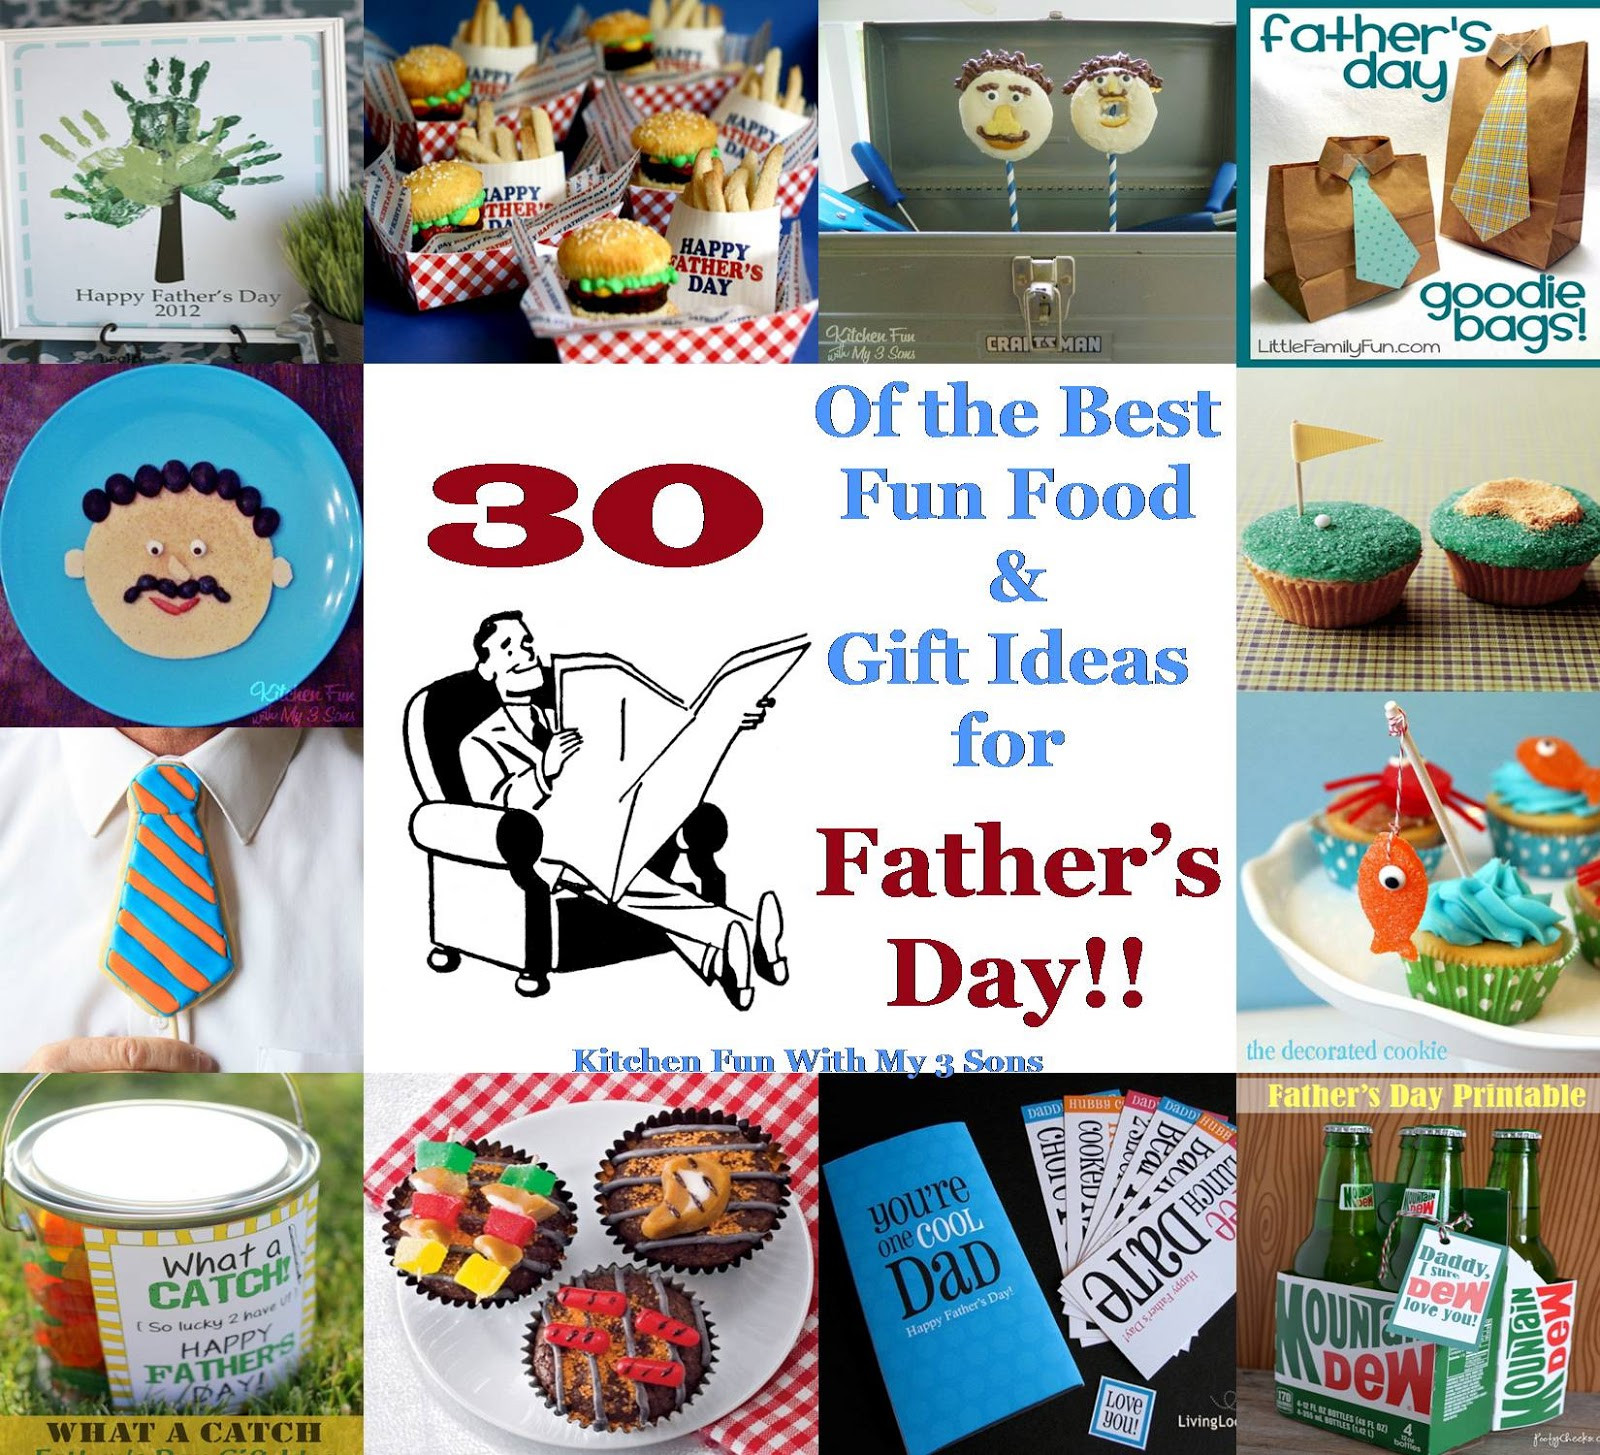 Funny Fathers Day Gift Ideas
 30 of the Best Fun Food & Gift Ideas for Father s Day